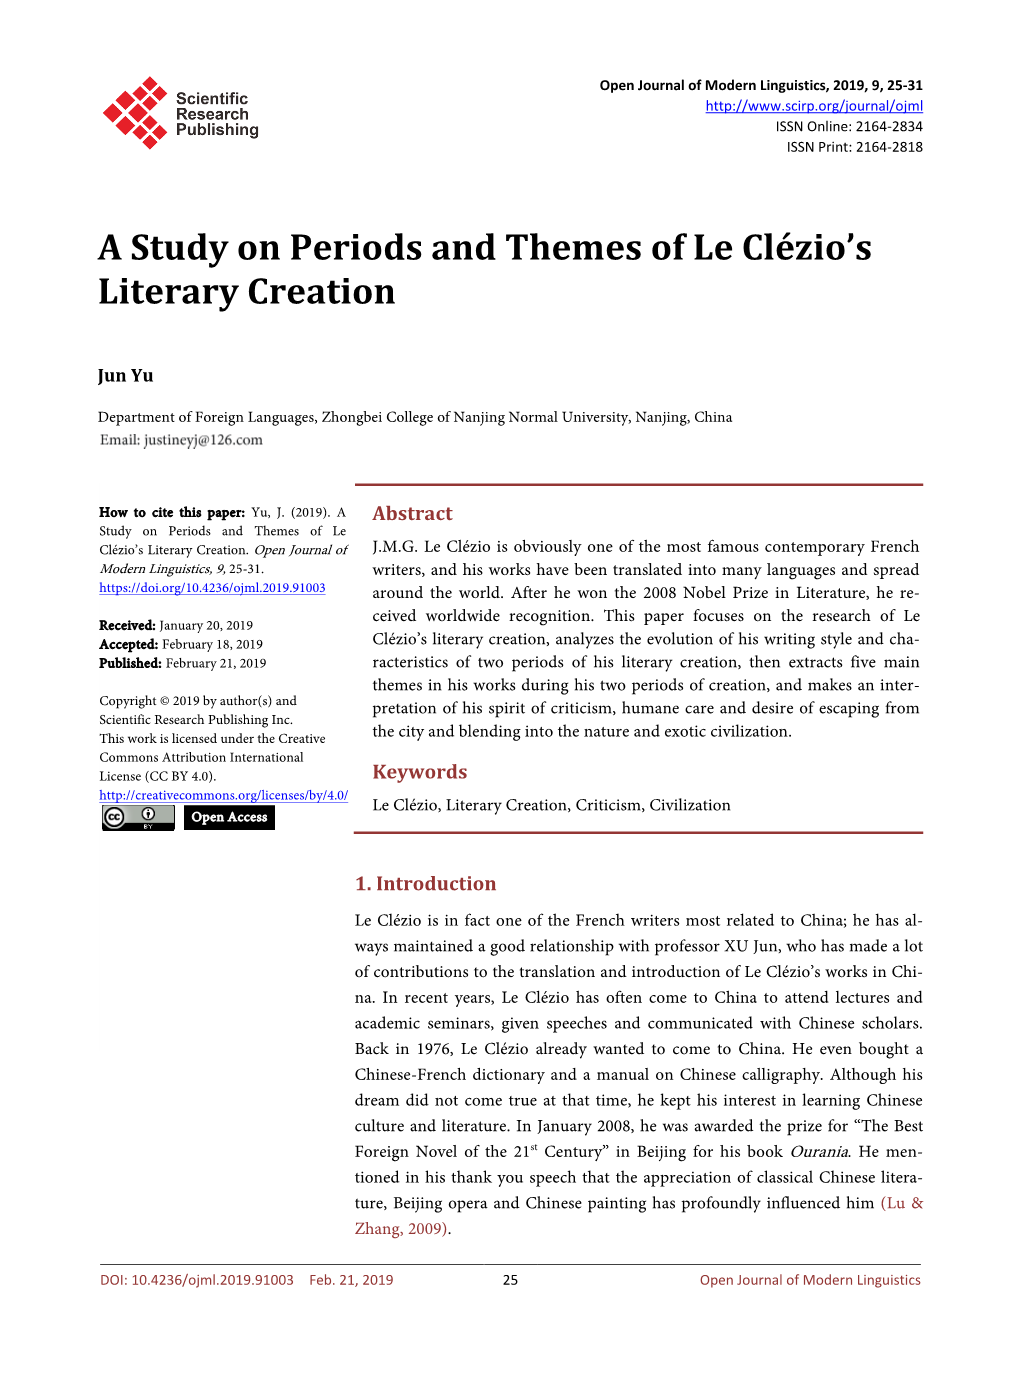 A Study on Periods and Themes of Le Clézio's Literary Creation